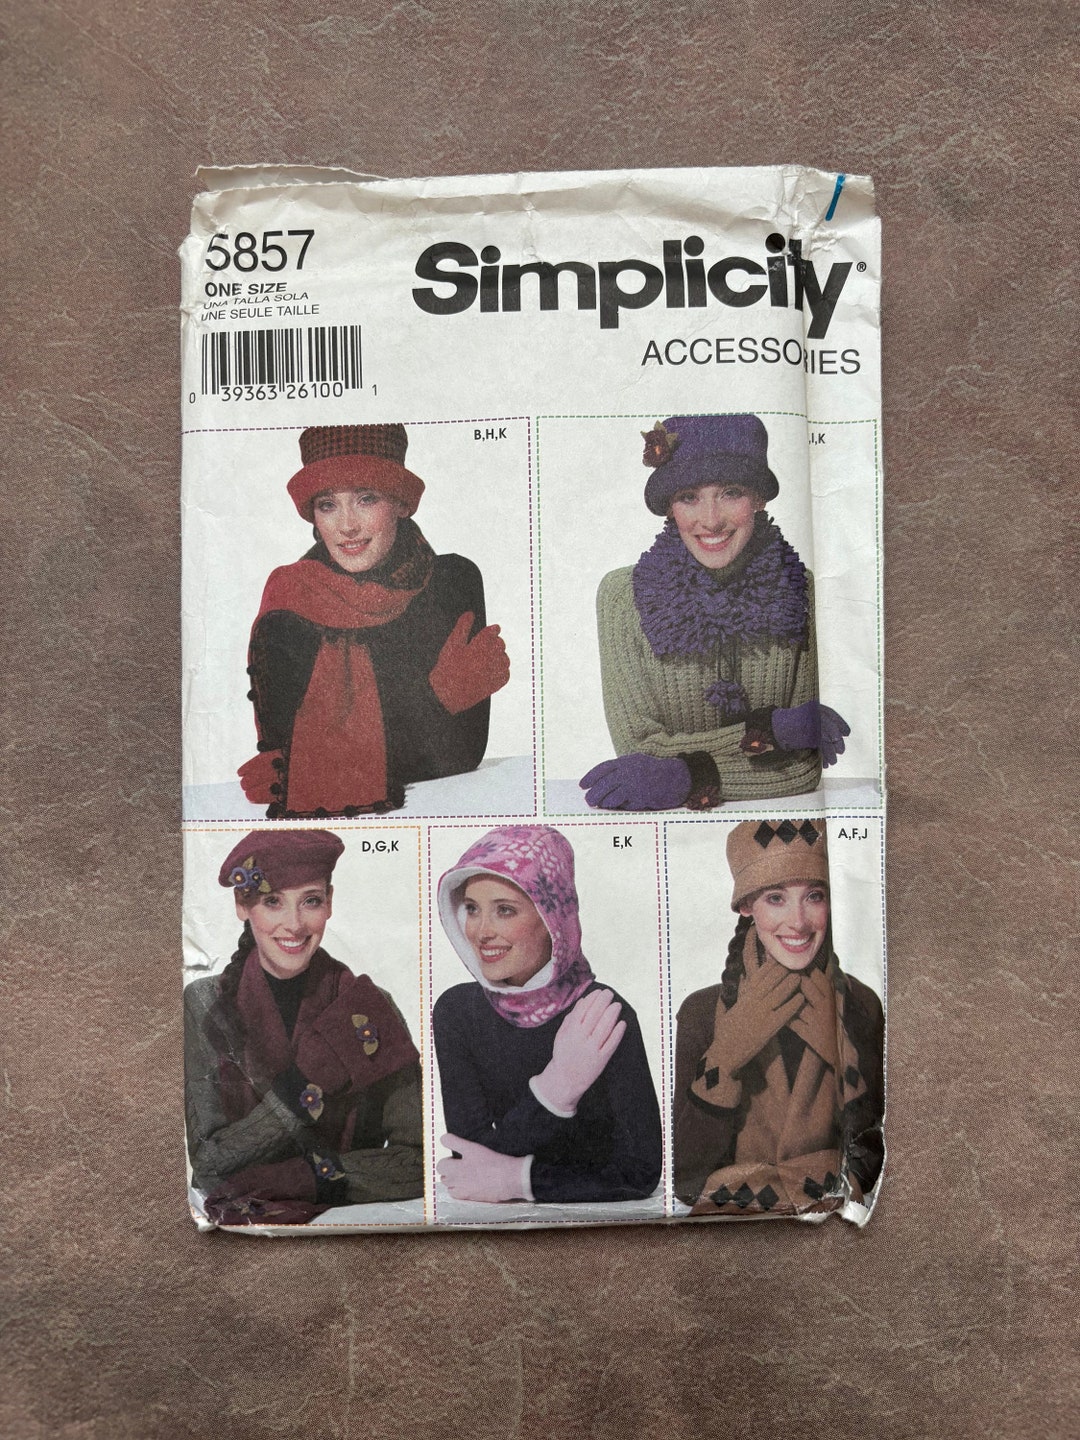 Vintage Simplicity Sewing Pattern 5857 Misses' Accessories Hats and ...